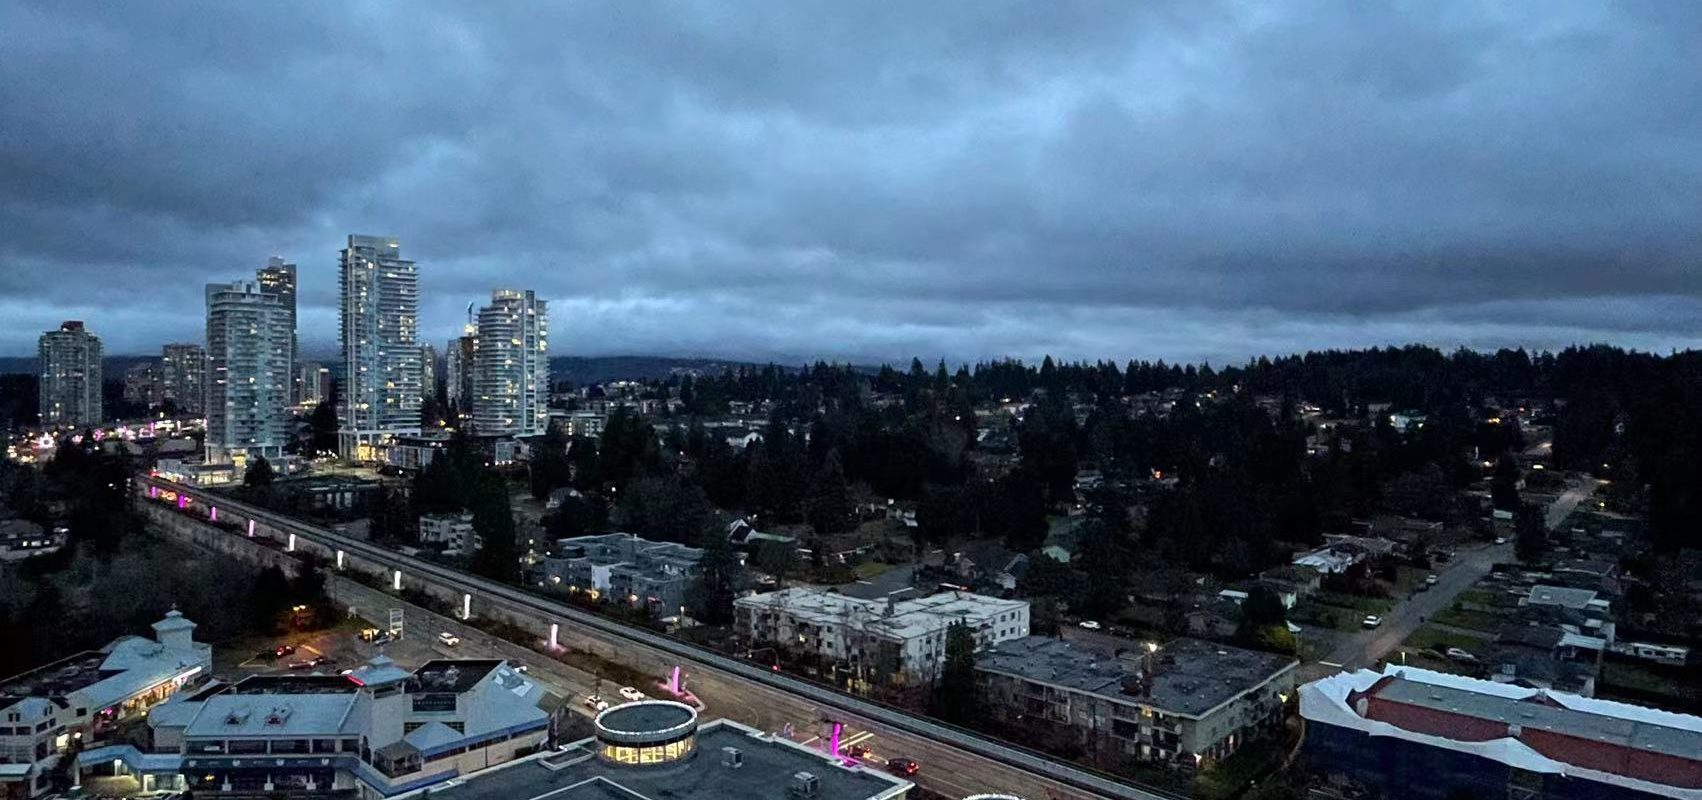 Burnaby North-East Corner unit Providing Picturesque Mountain View